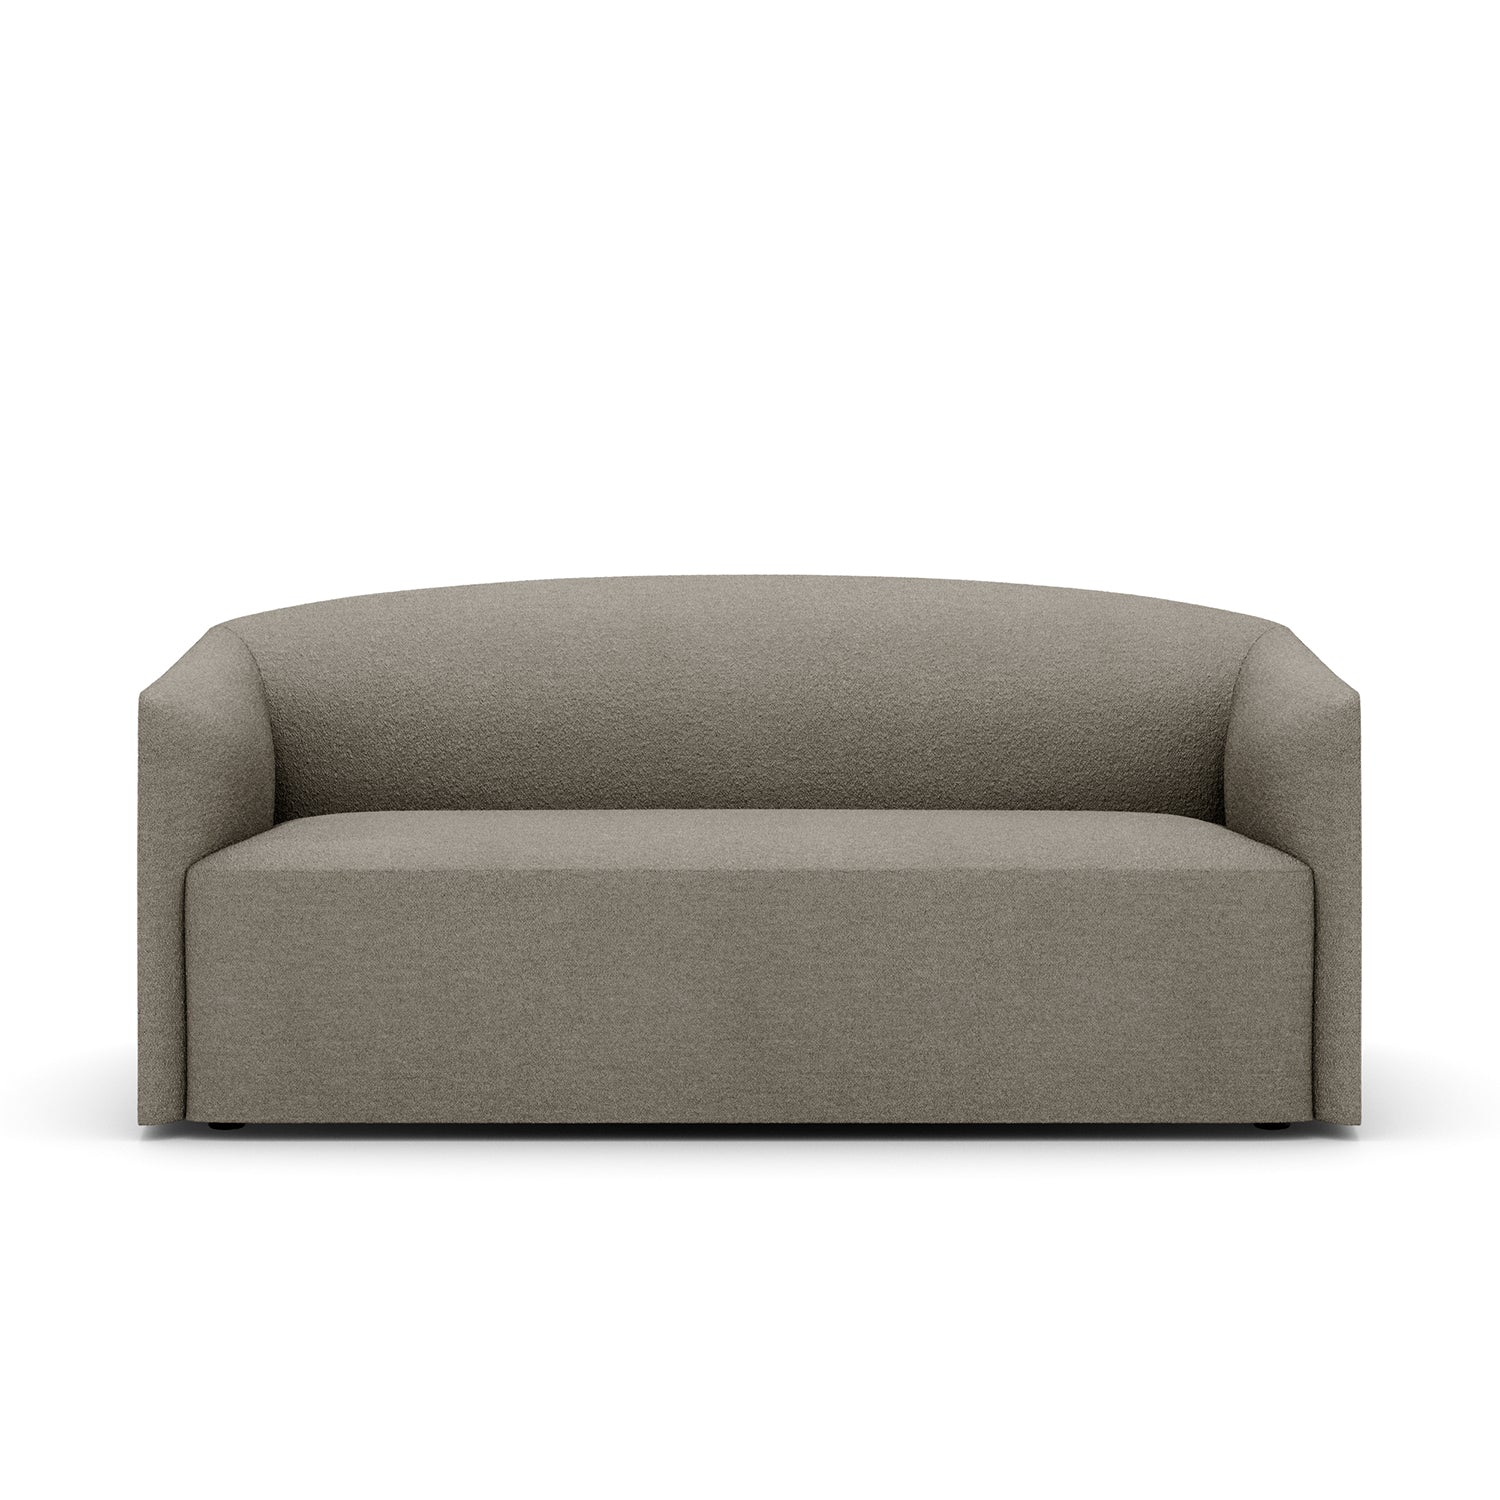 New Works Shore 2 Seater Sofa in taupe